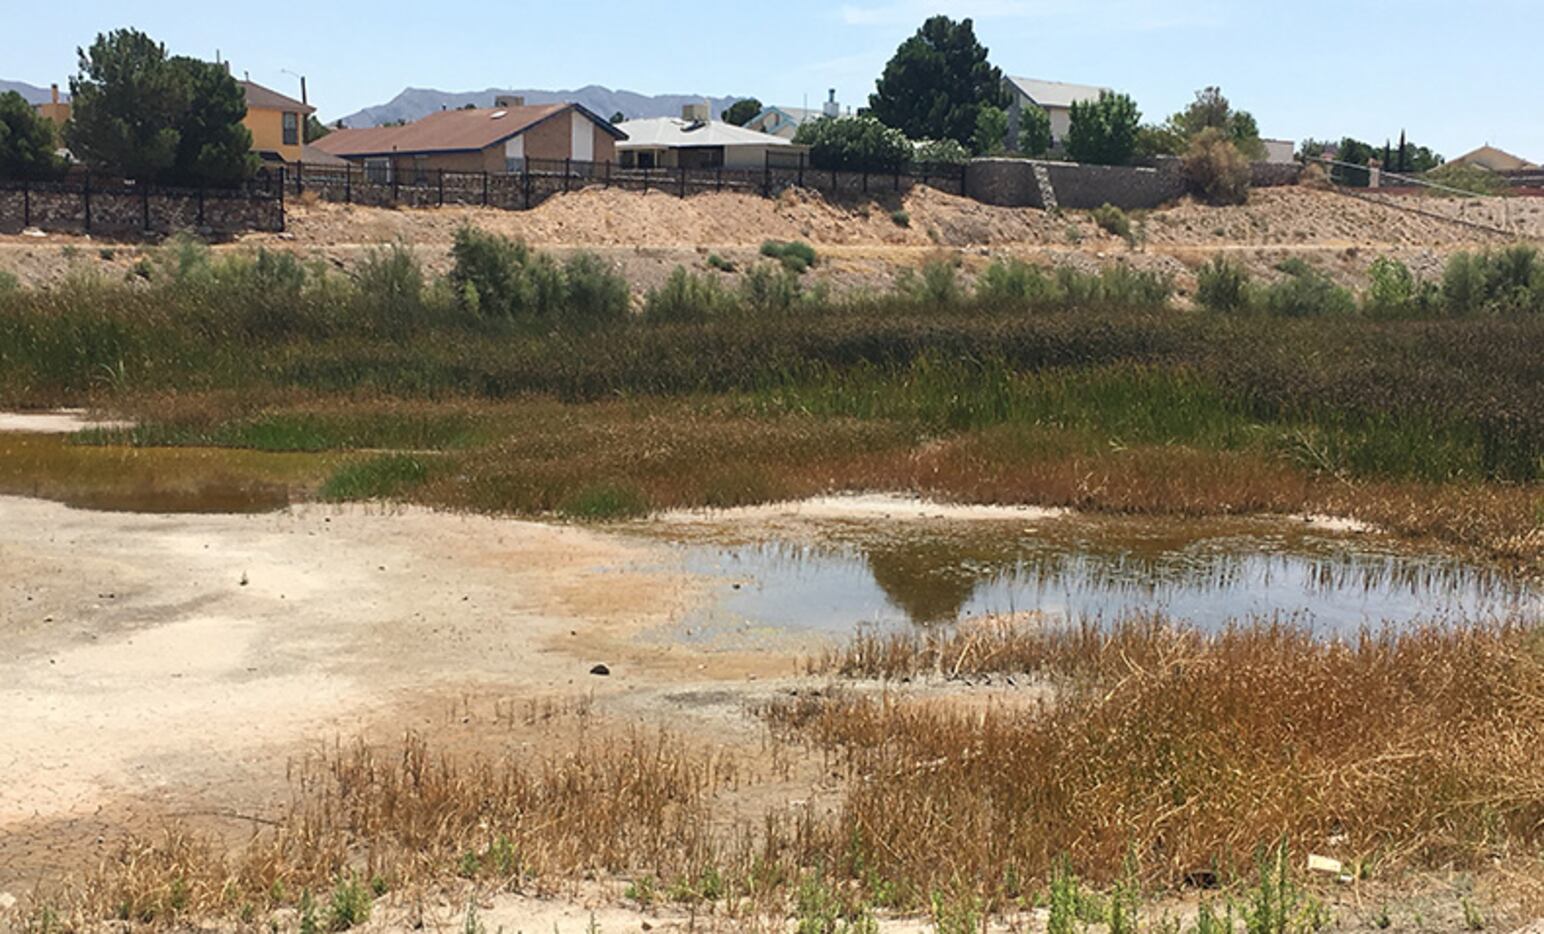 Standing water in a reservoir behind homes in El Paso is an area treated by vector control...